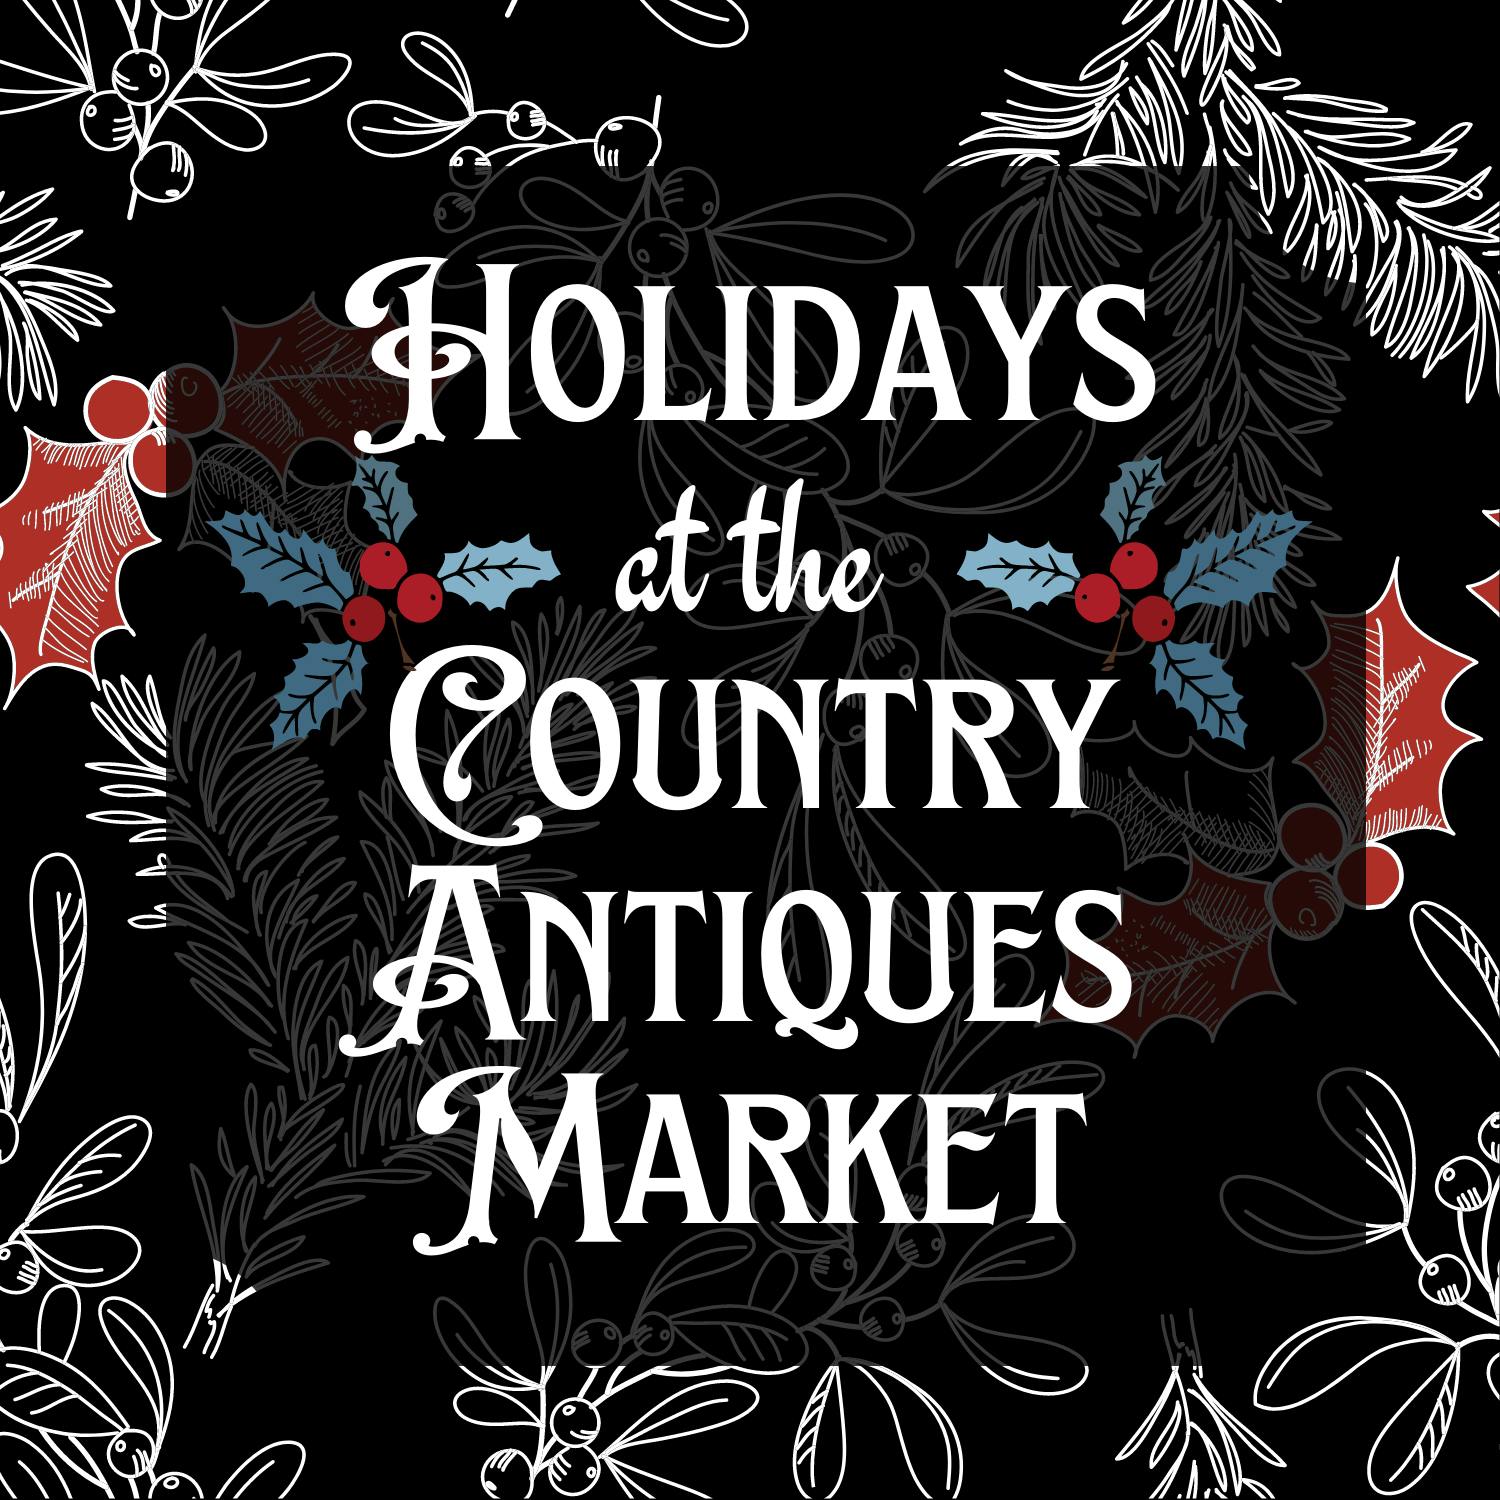 Holidays at the Country Antiques Market